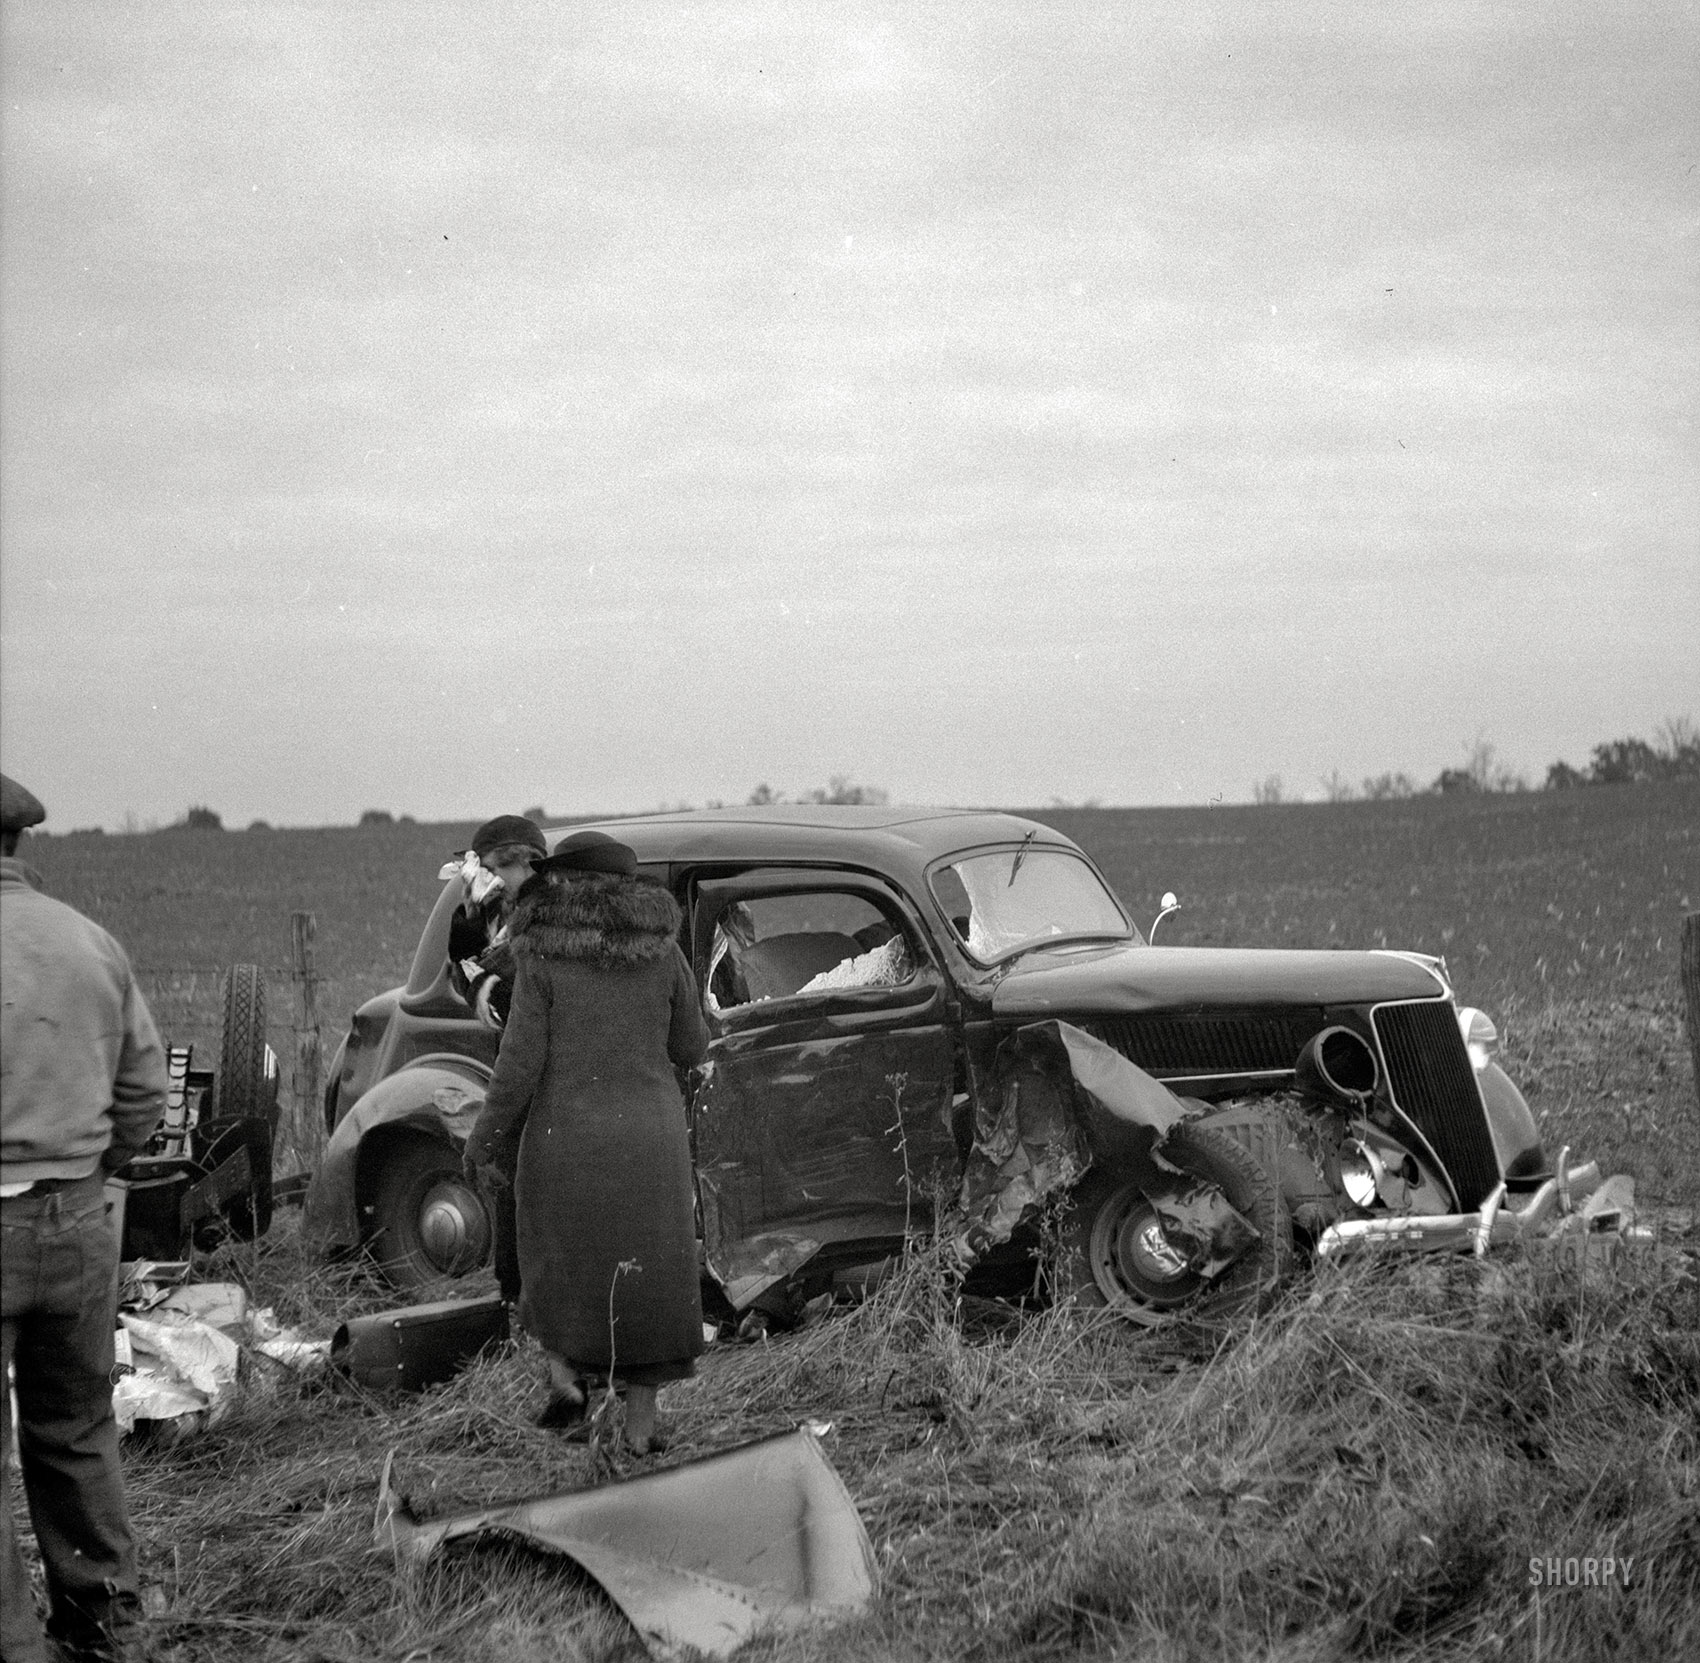 November 1936. "Automobile accident on U.S. 40 between Hagerstown and Cumberland, Maryland." Crash Reconstruction, Part 2. Medium-format negative by Arthur Rothstein for the Resettlement Administration. View full size.